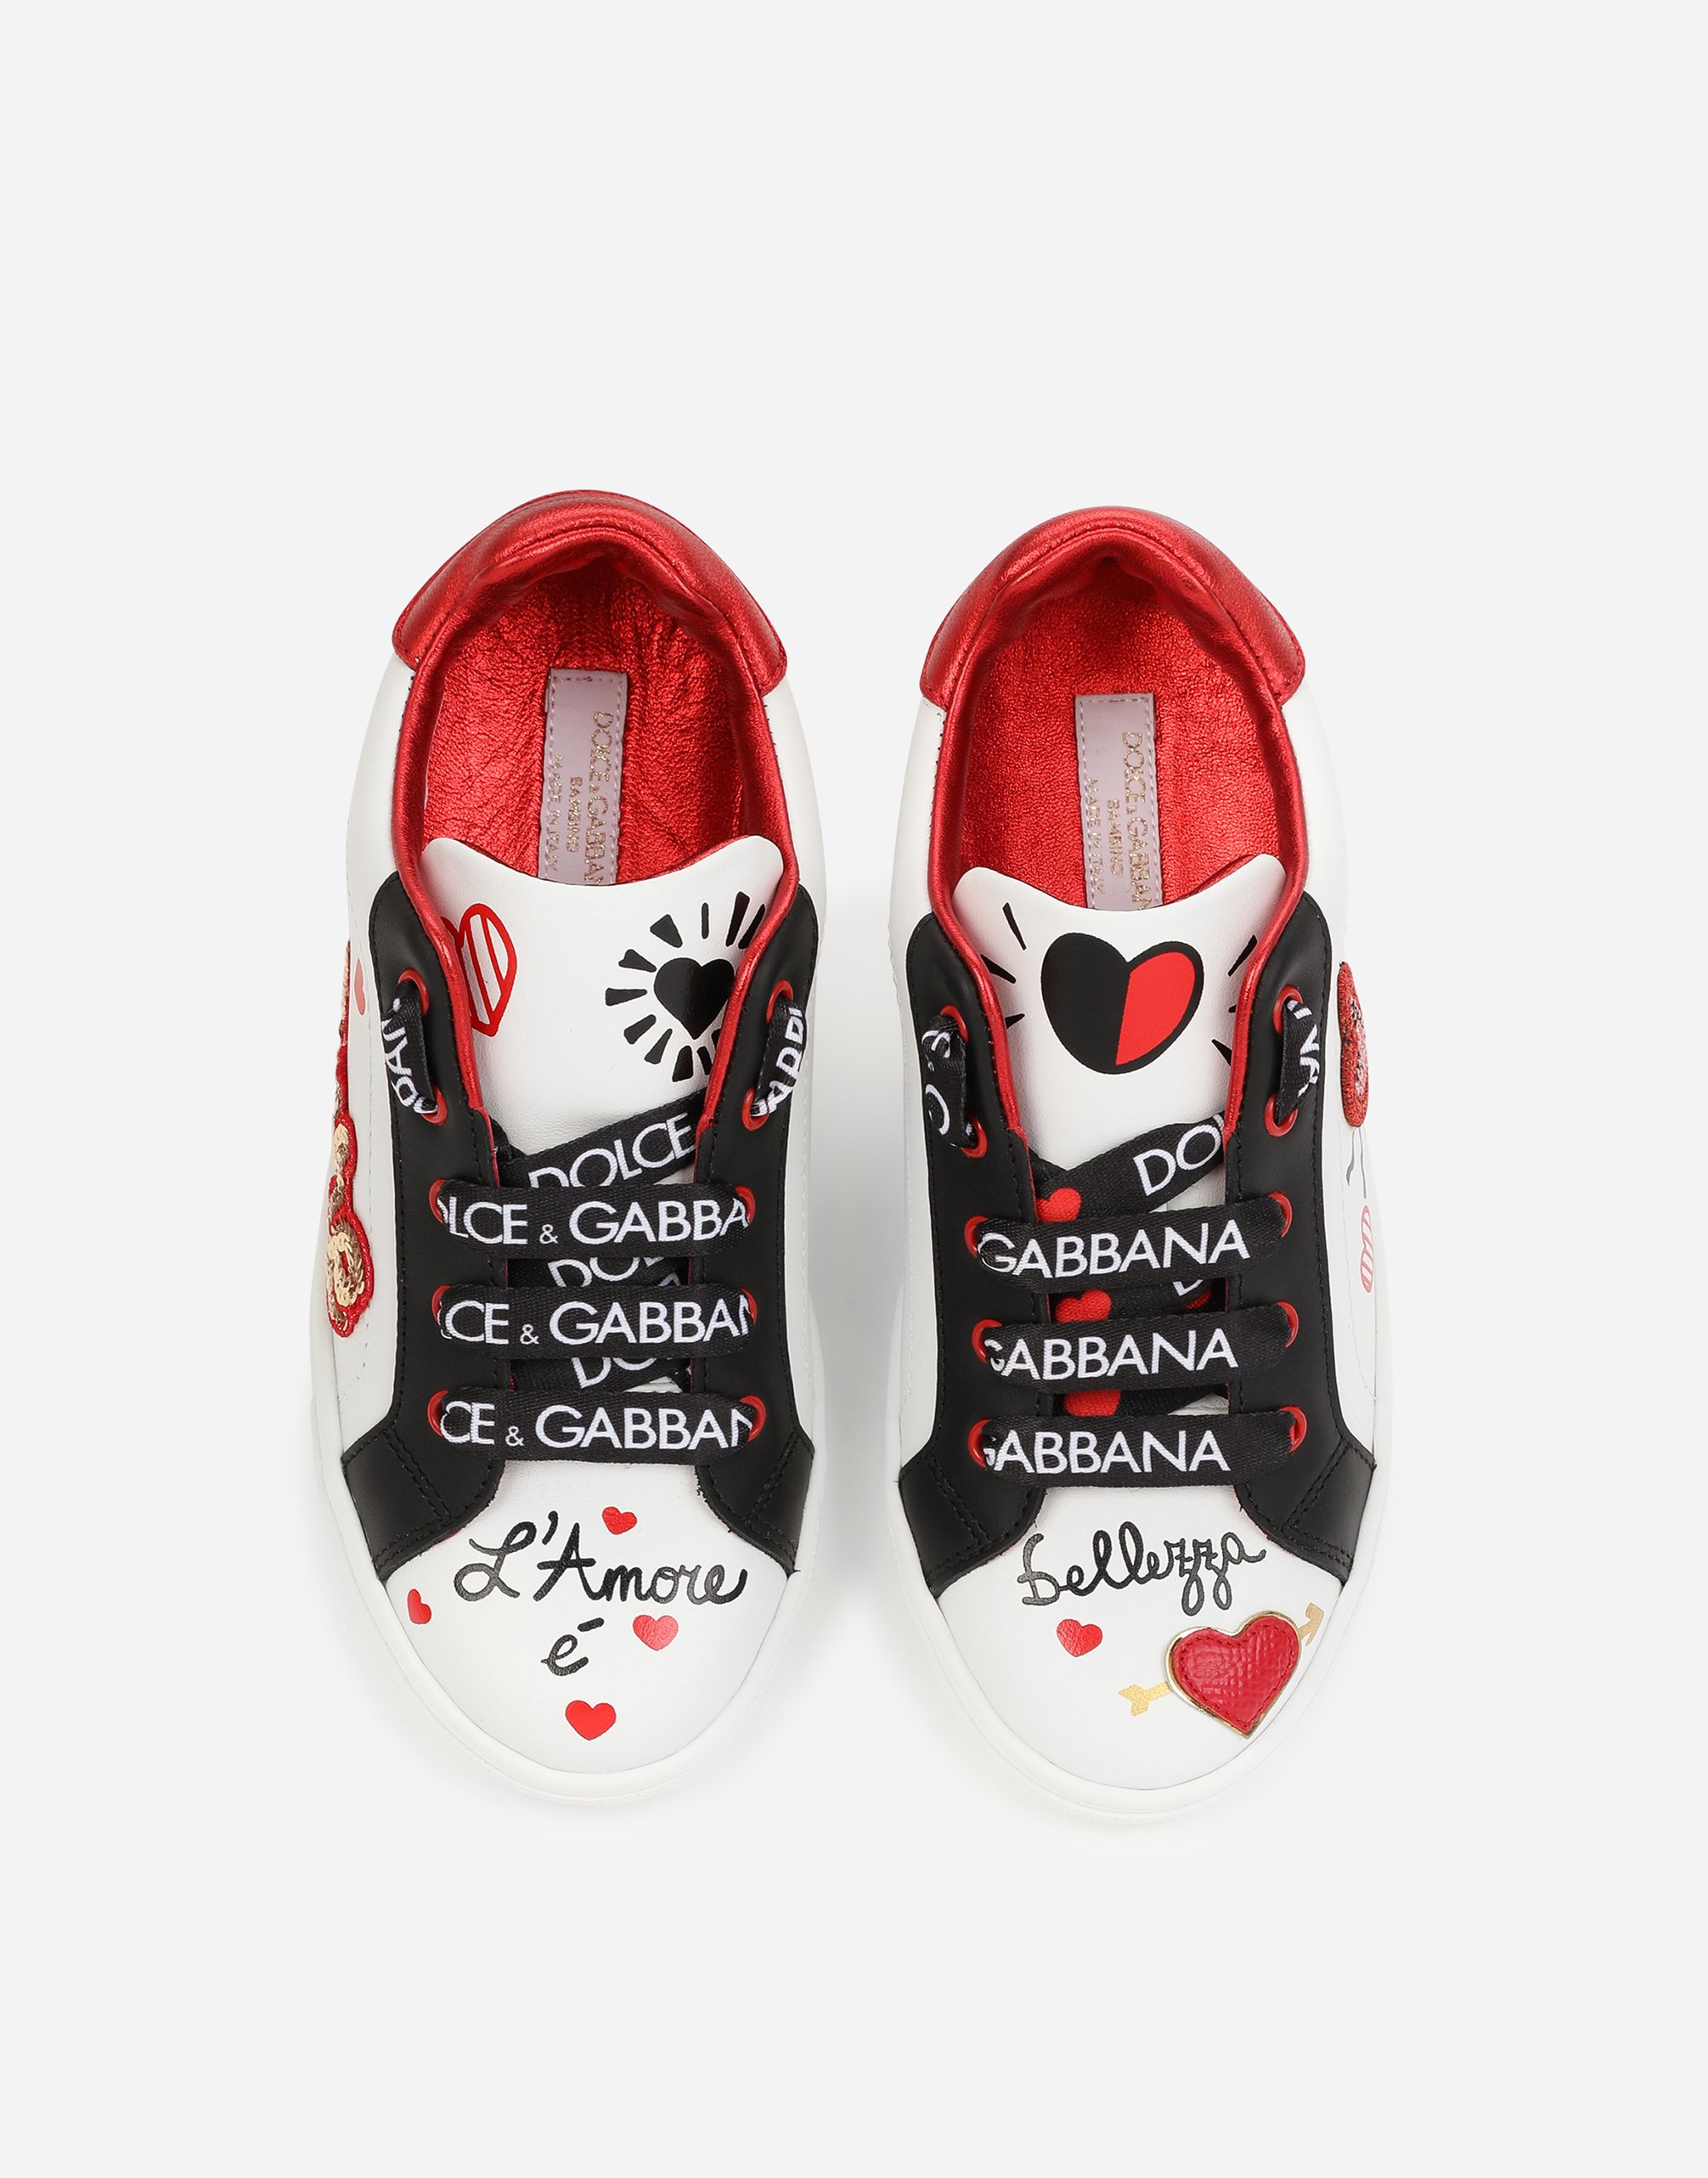 dolce gabbana amore shoes